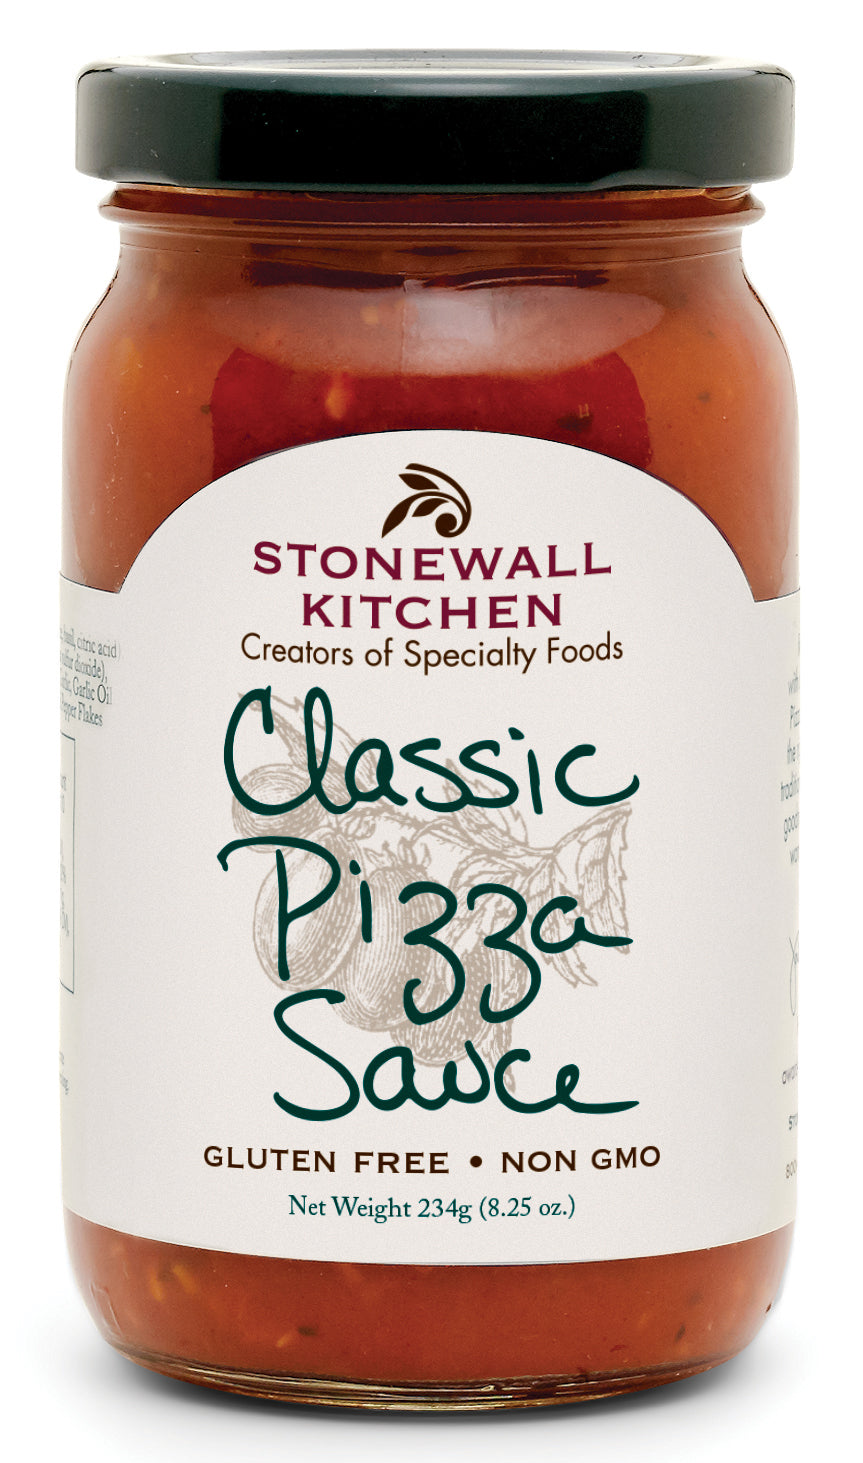 Stonewall Kitchen Classic Pizza Sauce- Olive Oil Etcetera- Bucks County's Gourmet Oil and Vinegar Shop